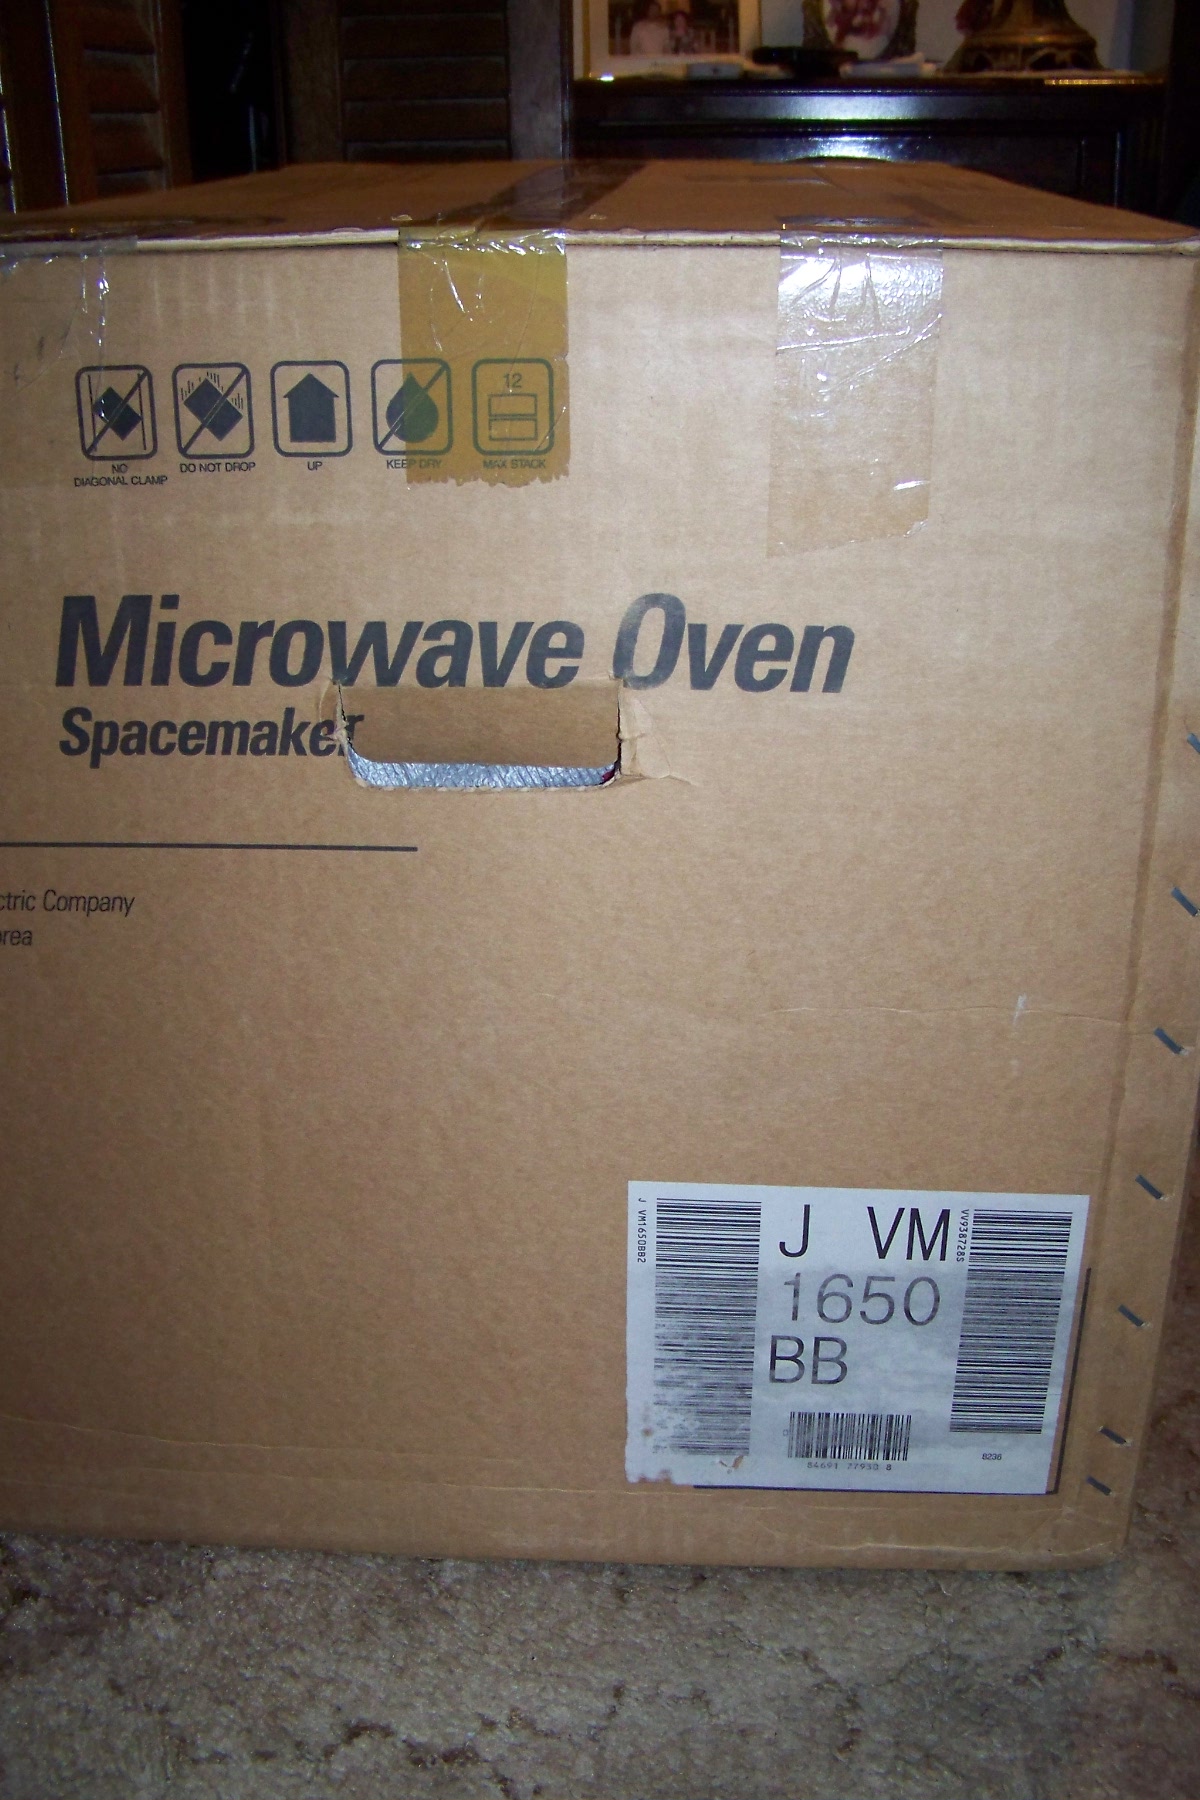 Microwave Oven over the range